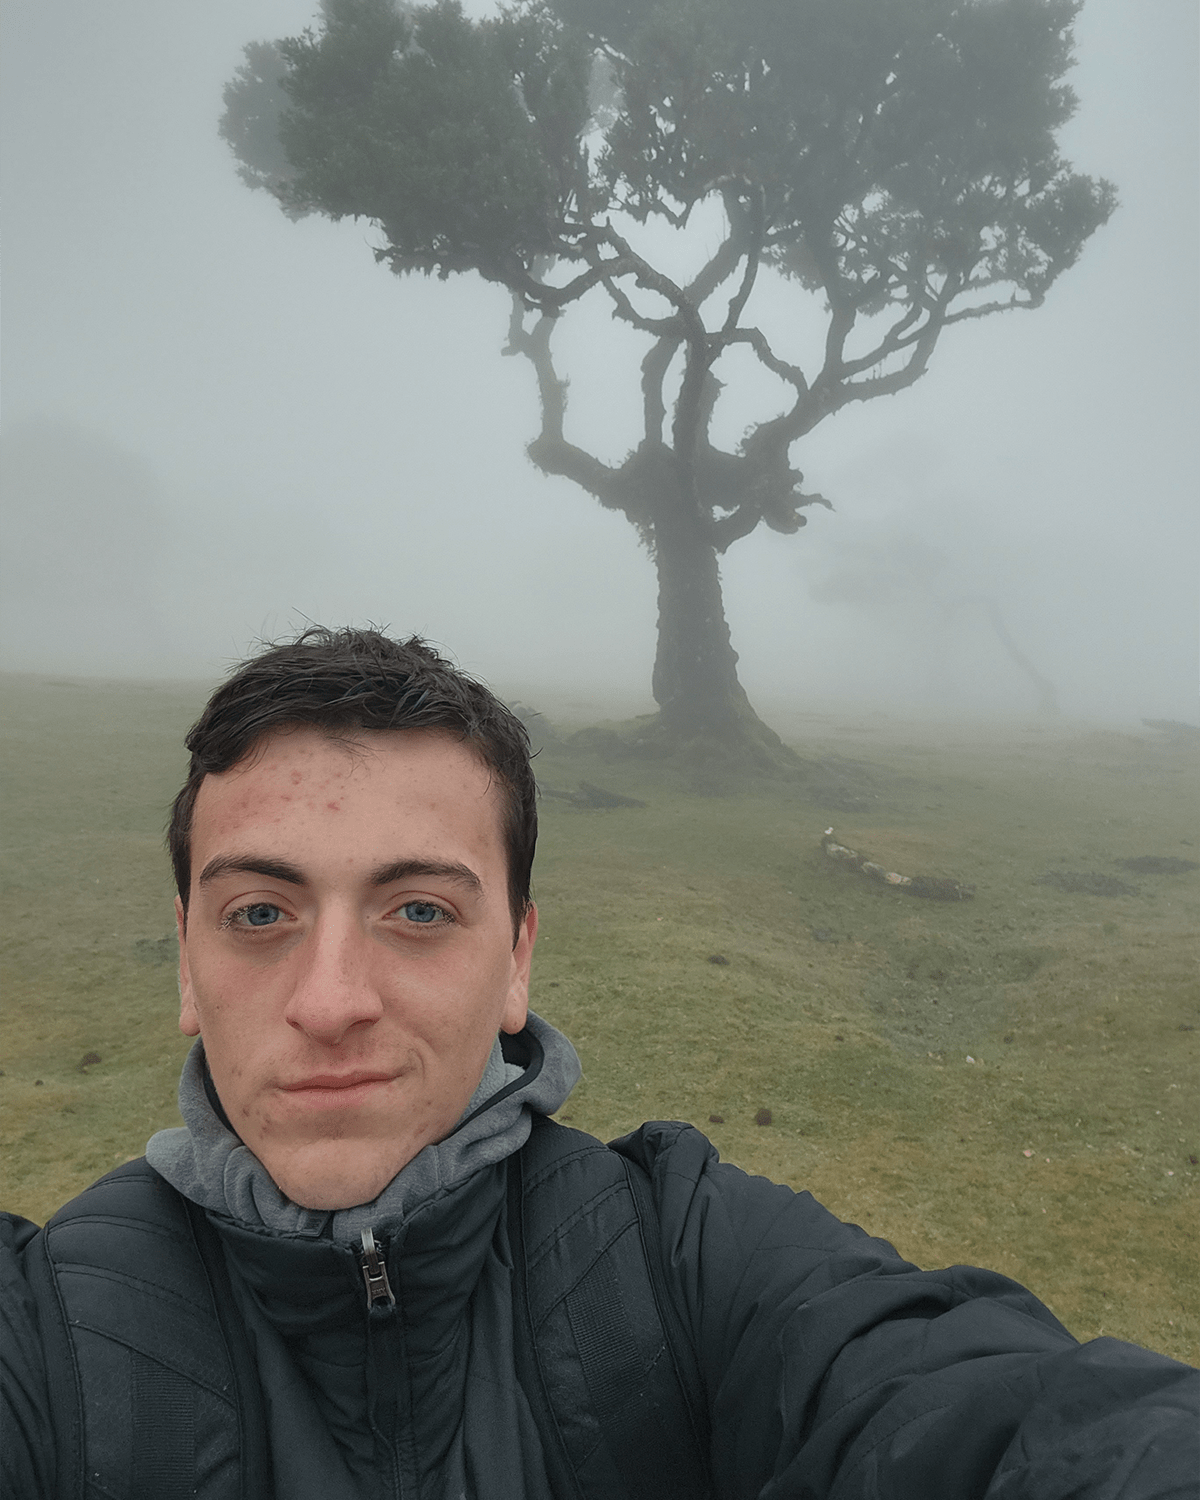 Zackrey gives a half-smile into the camera. A cork oak tree is seen through the fog behind him.